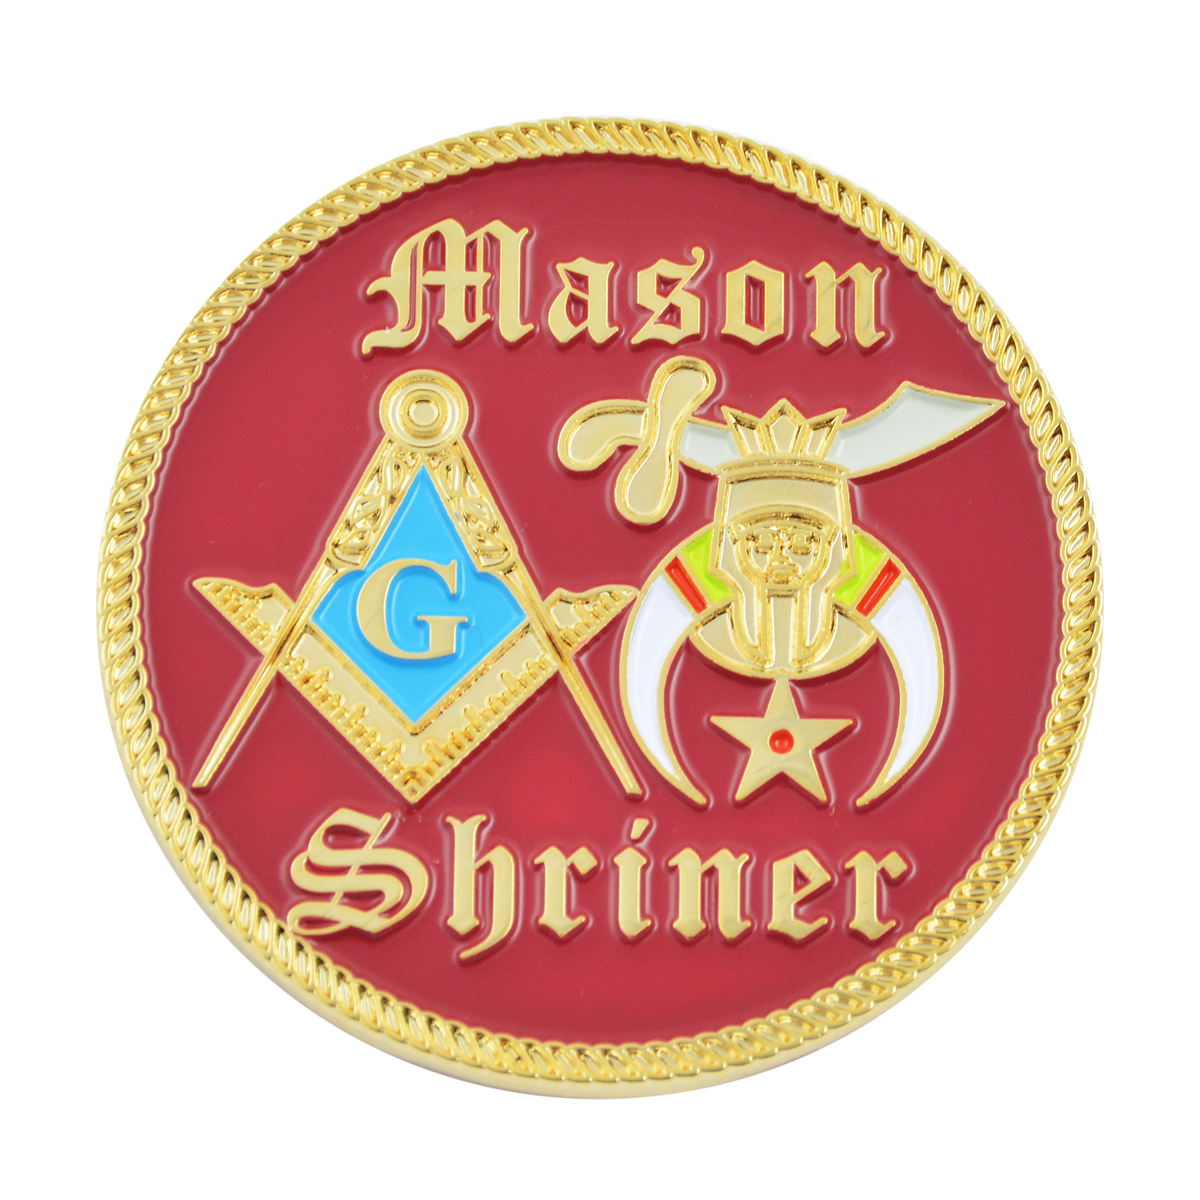 Are shriners part of the masons